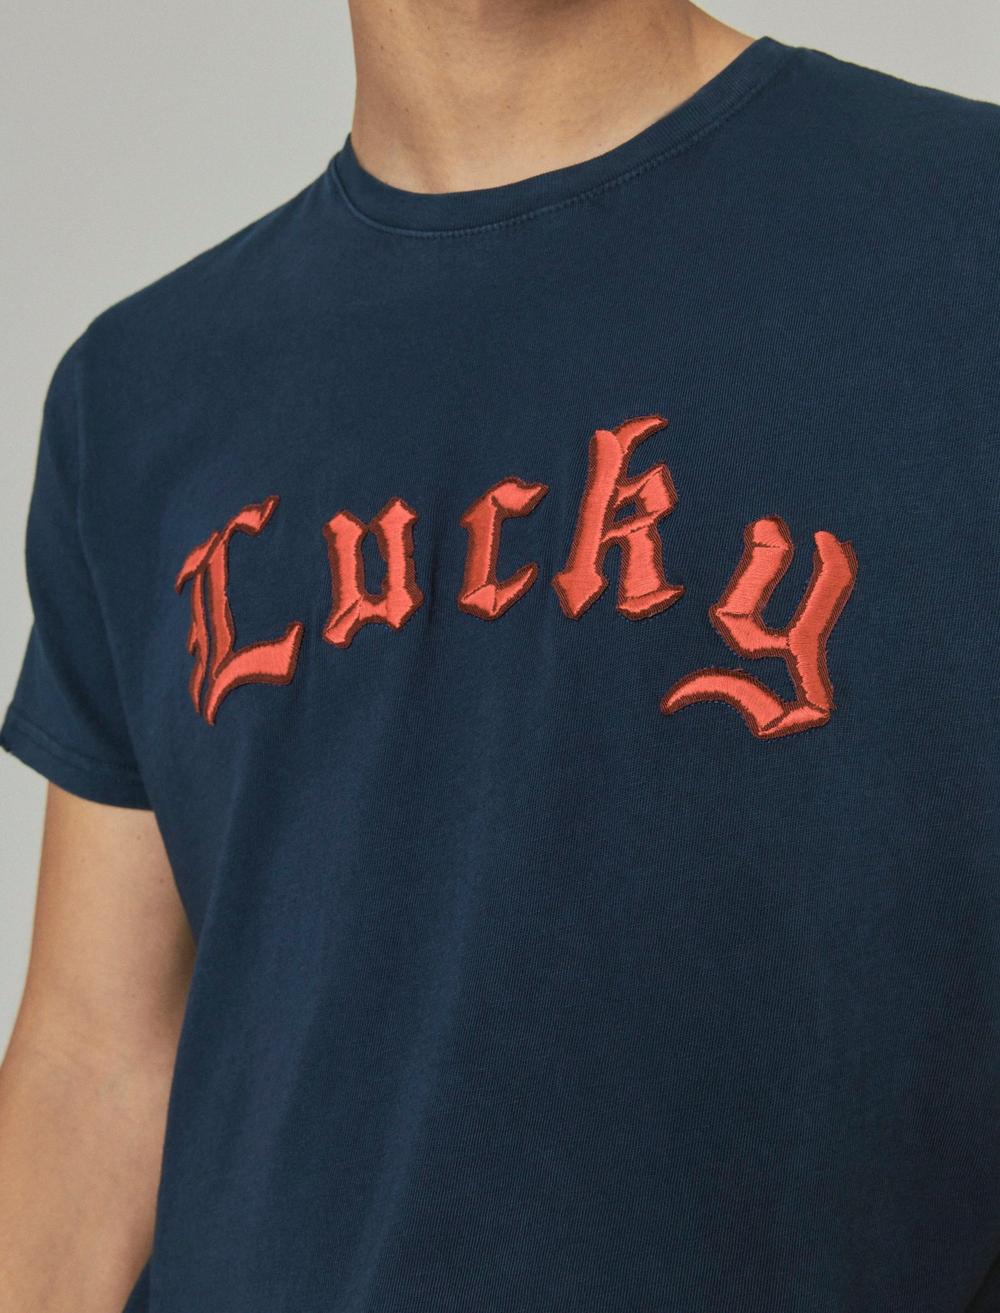 VINTAGE LUCKY GOTHIC GRAPHIC TEE, image 5